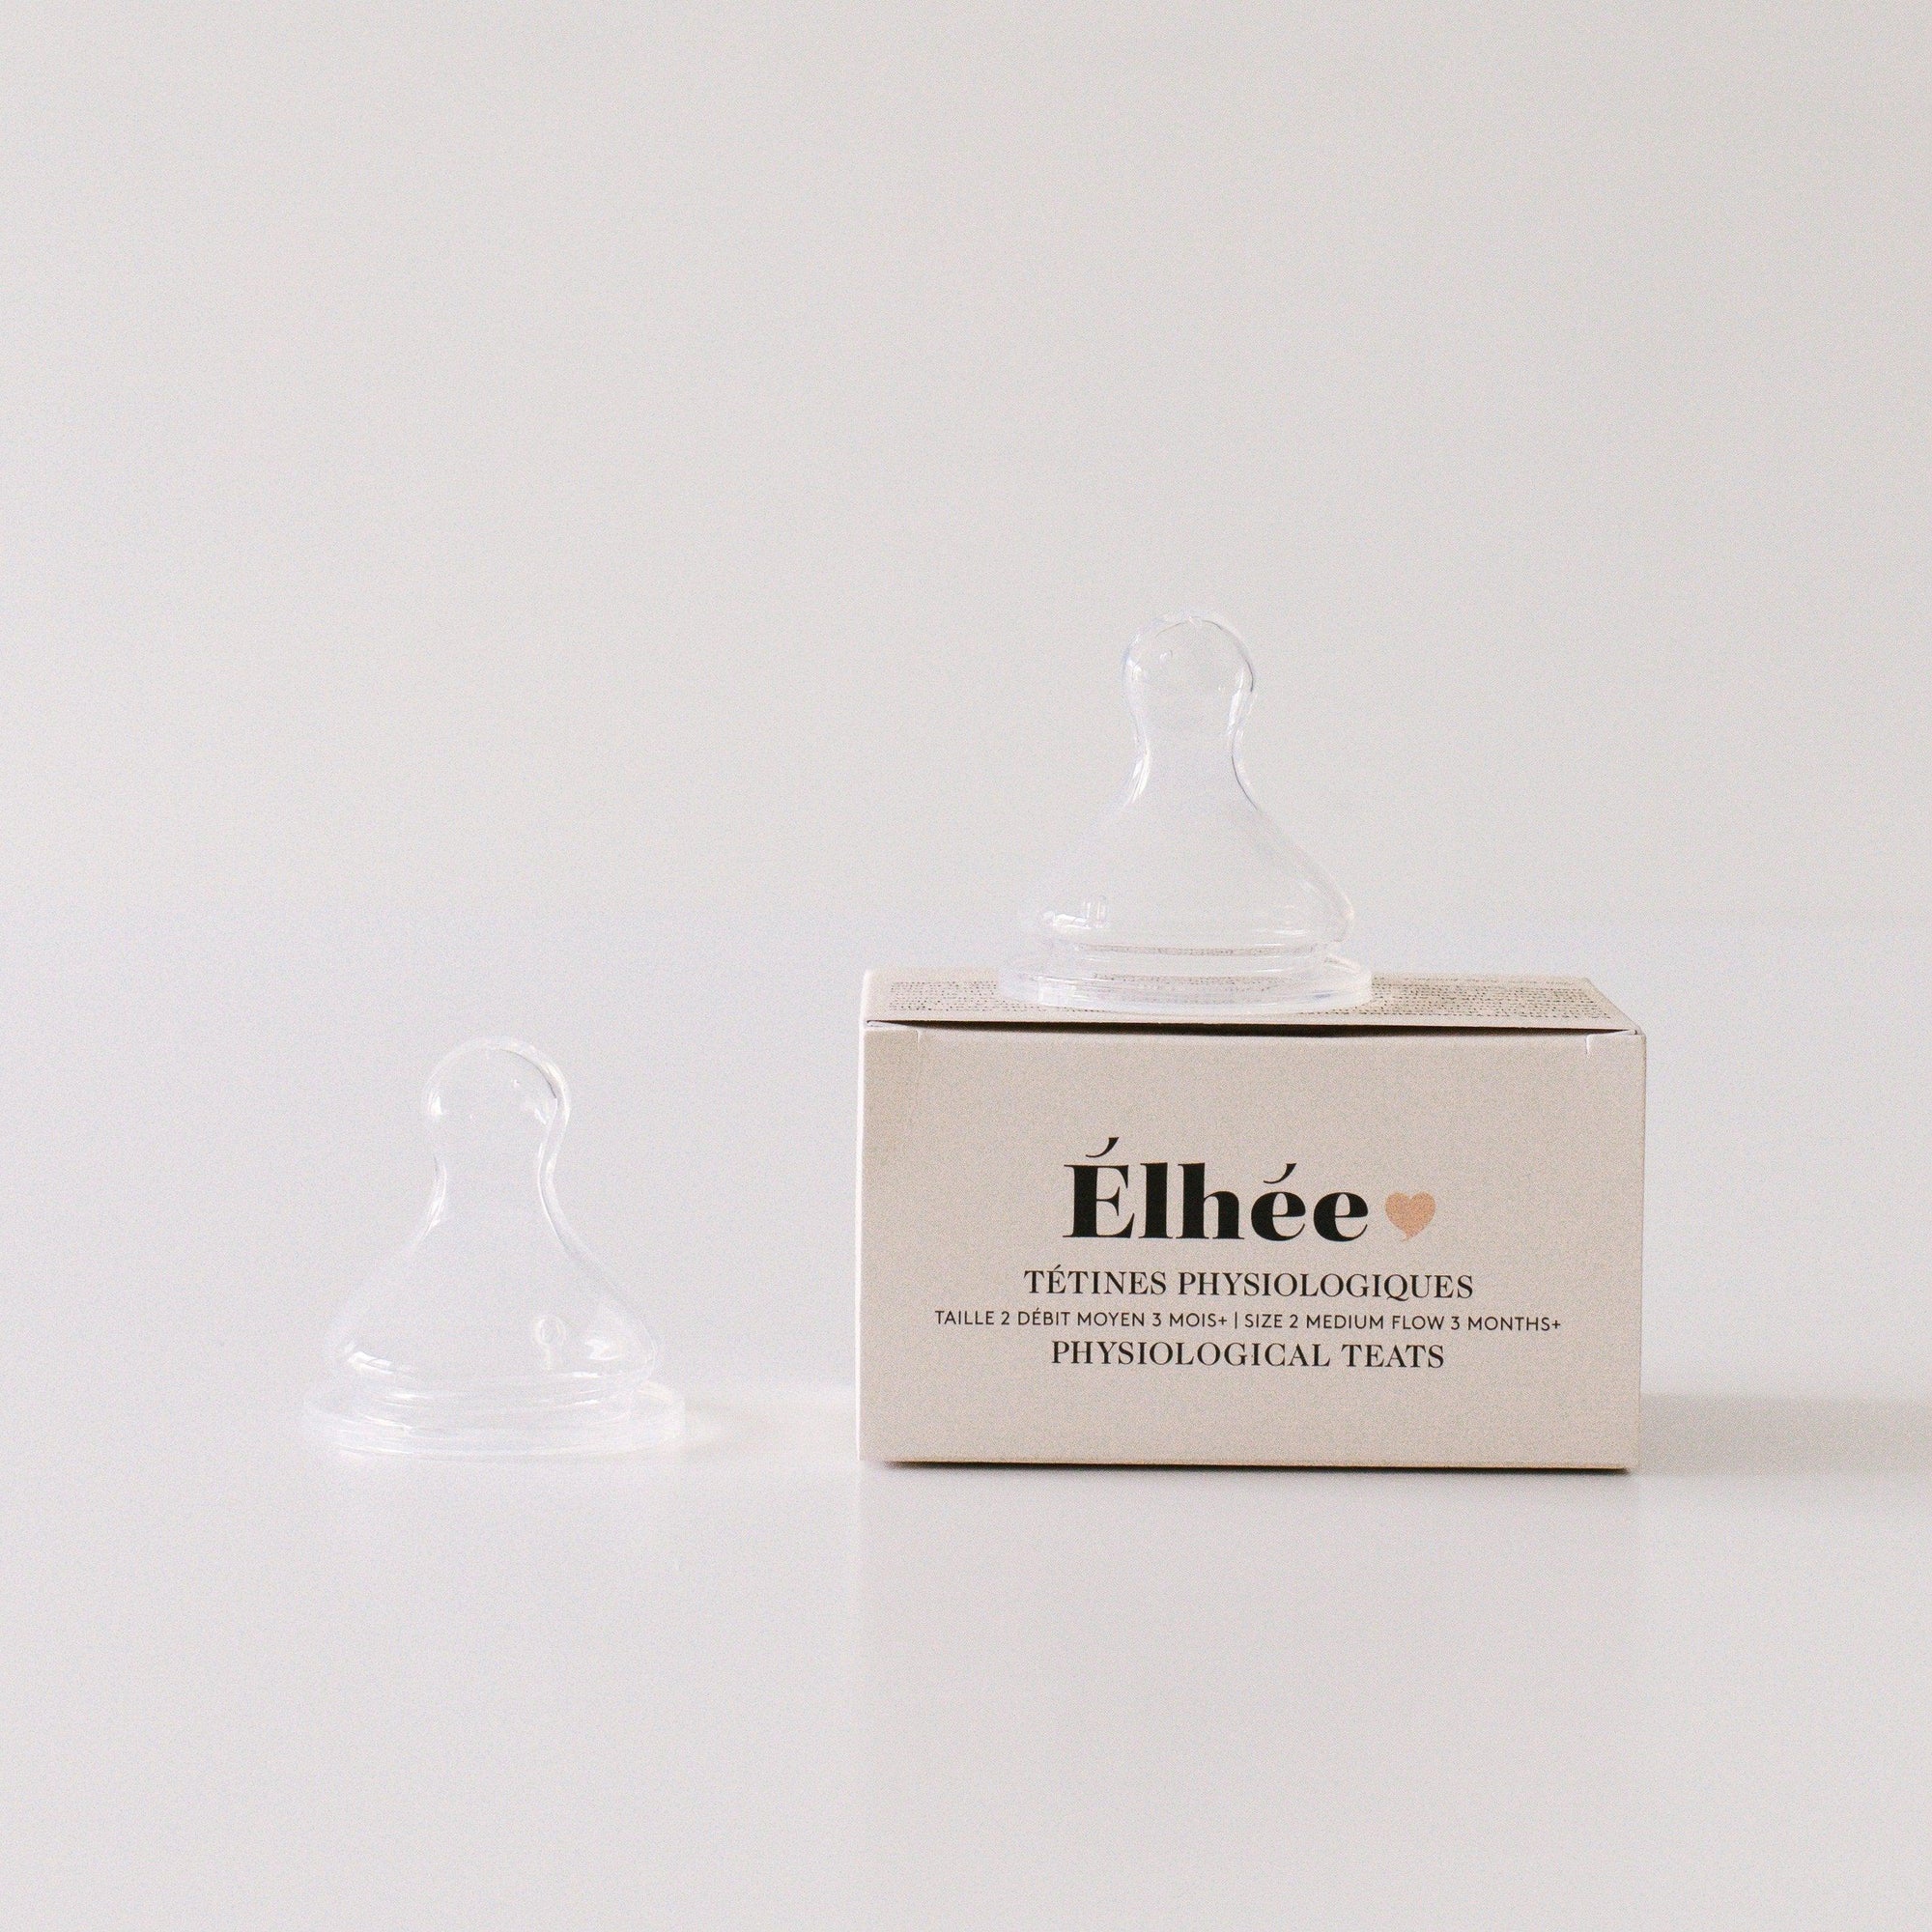 A set of Elhée France fast flow teats sitting on and against a box on a white surface.